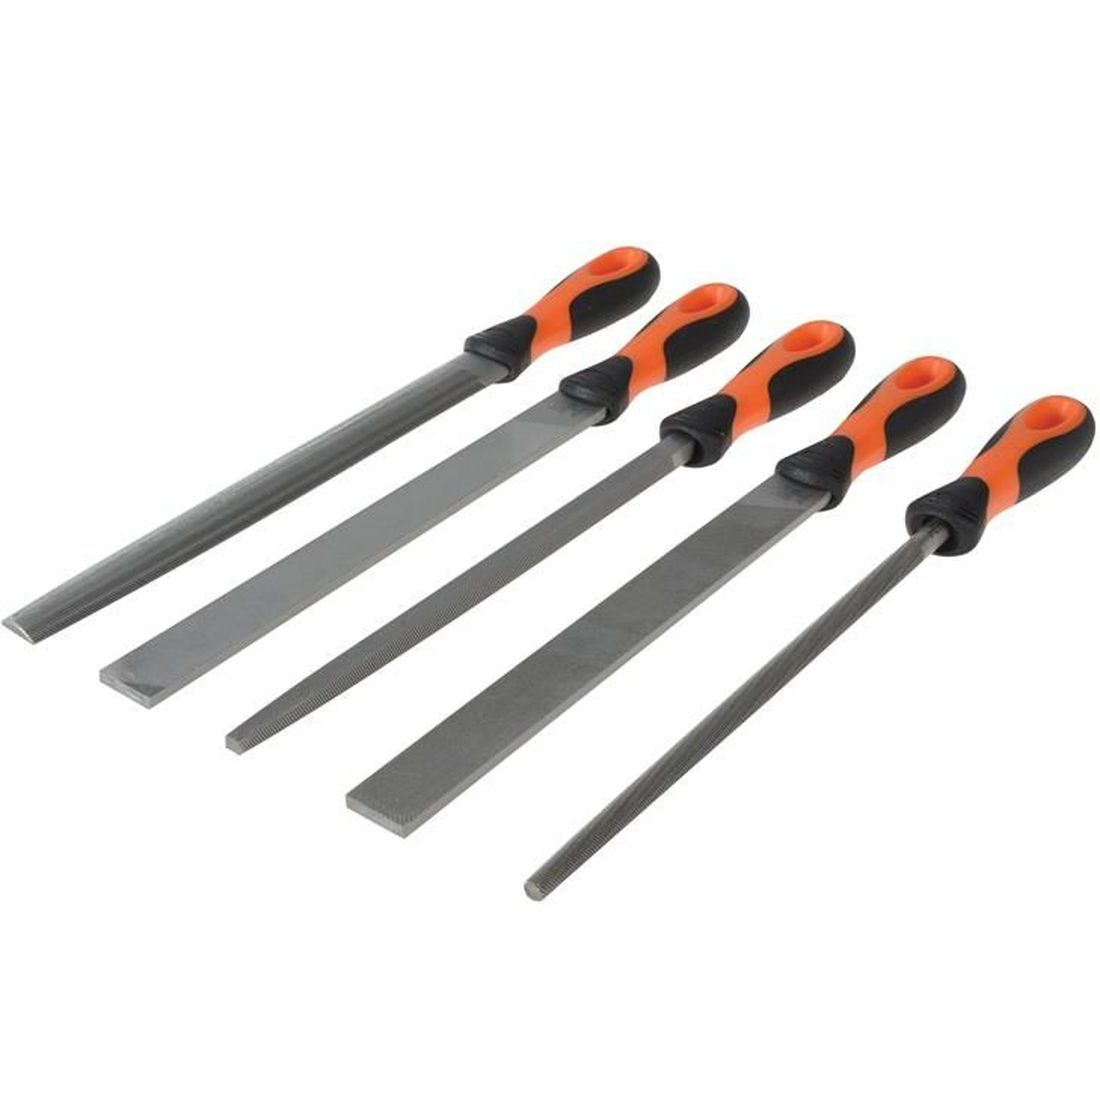 Bahco 250mm (10in) ERGO Engineering File Set, 5 Piece                                